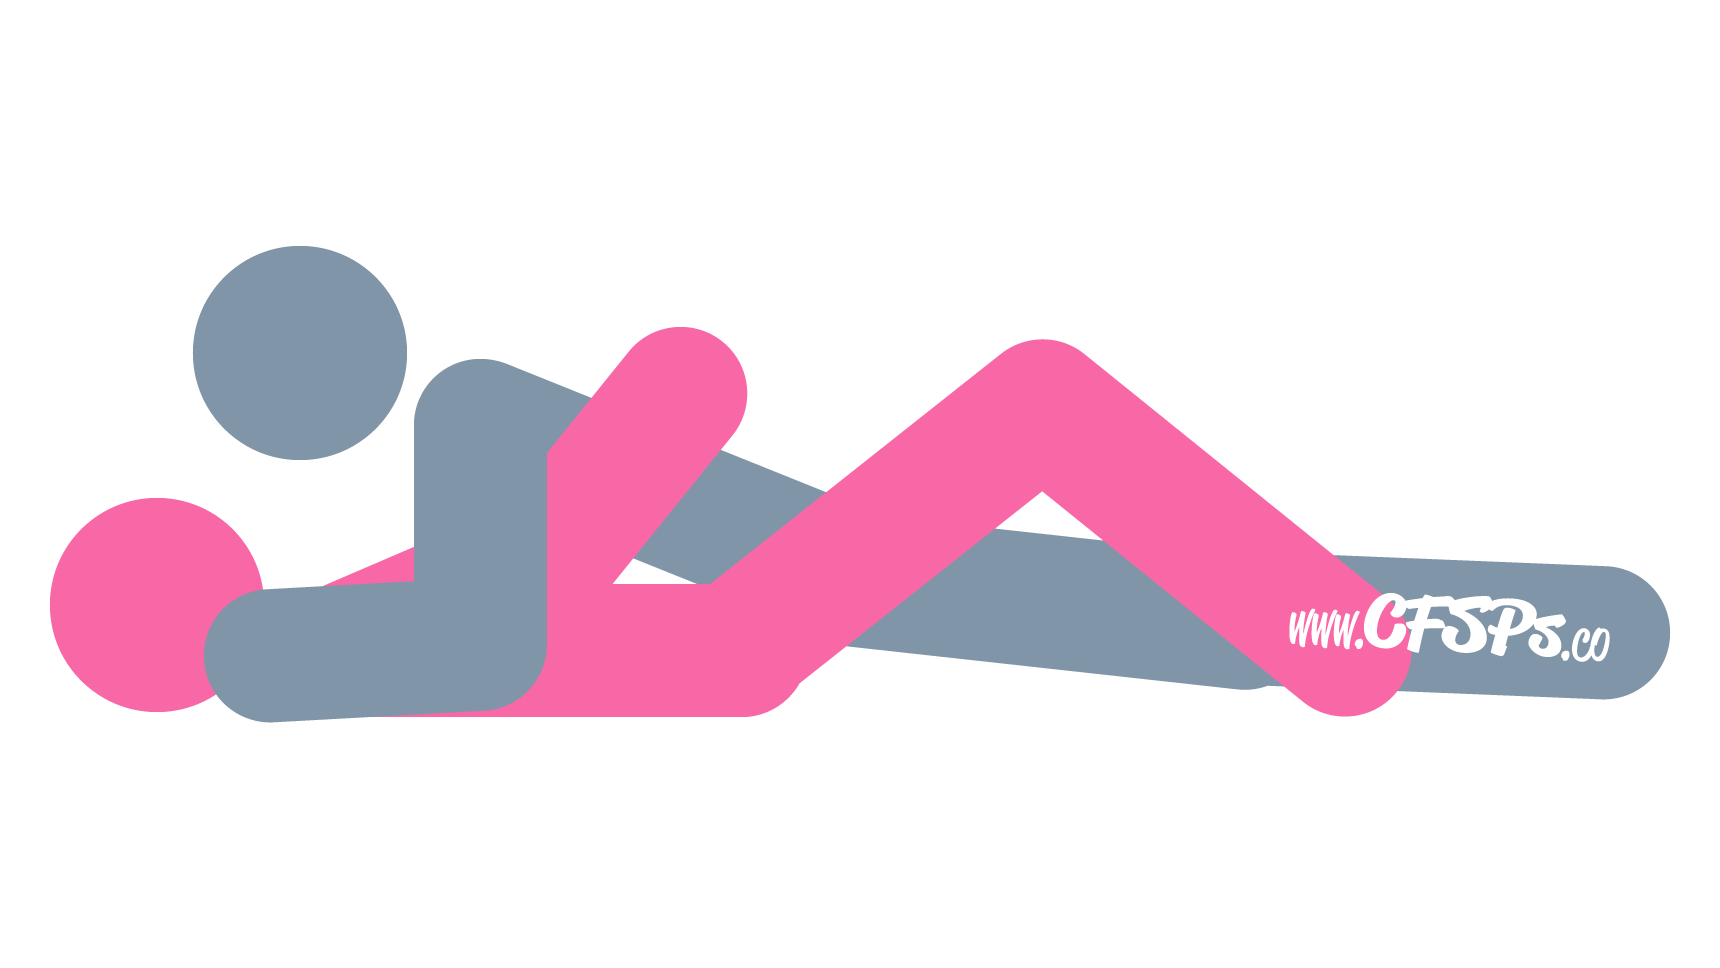 An illustration of the Missionary sex position. This picture demonstrates how Missionary is an intimate, man-on-top sex position with deep penetration.